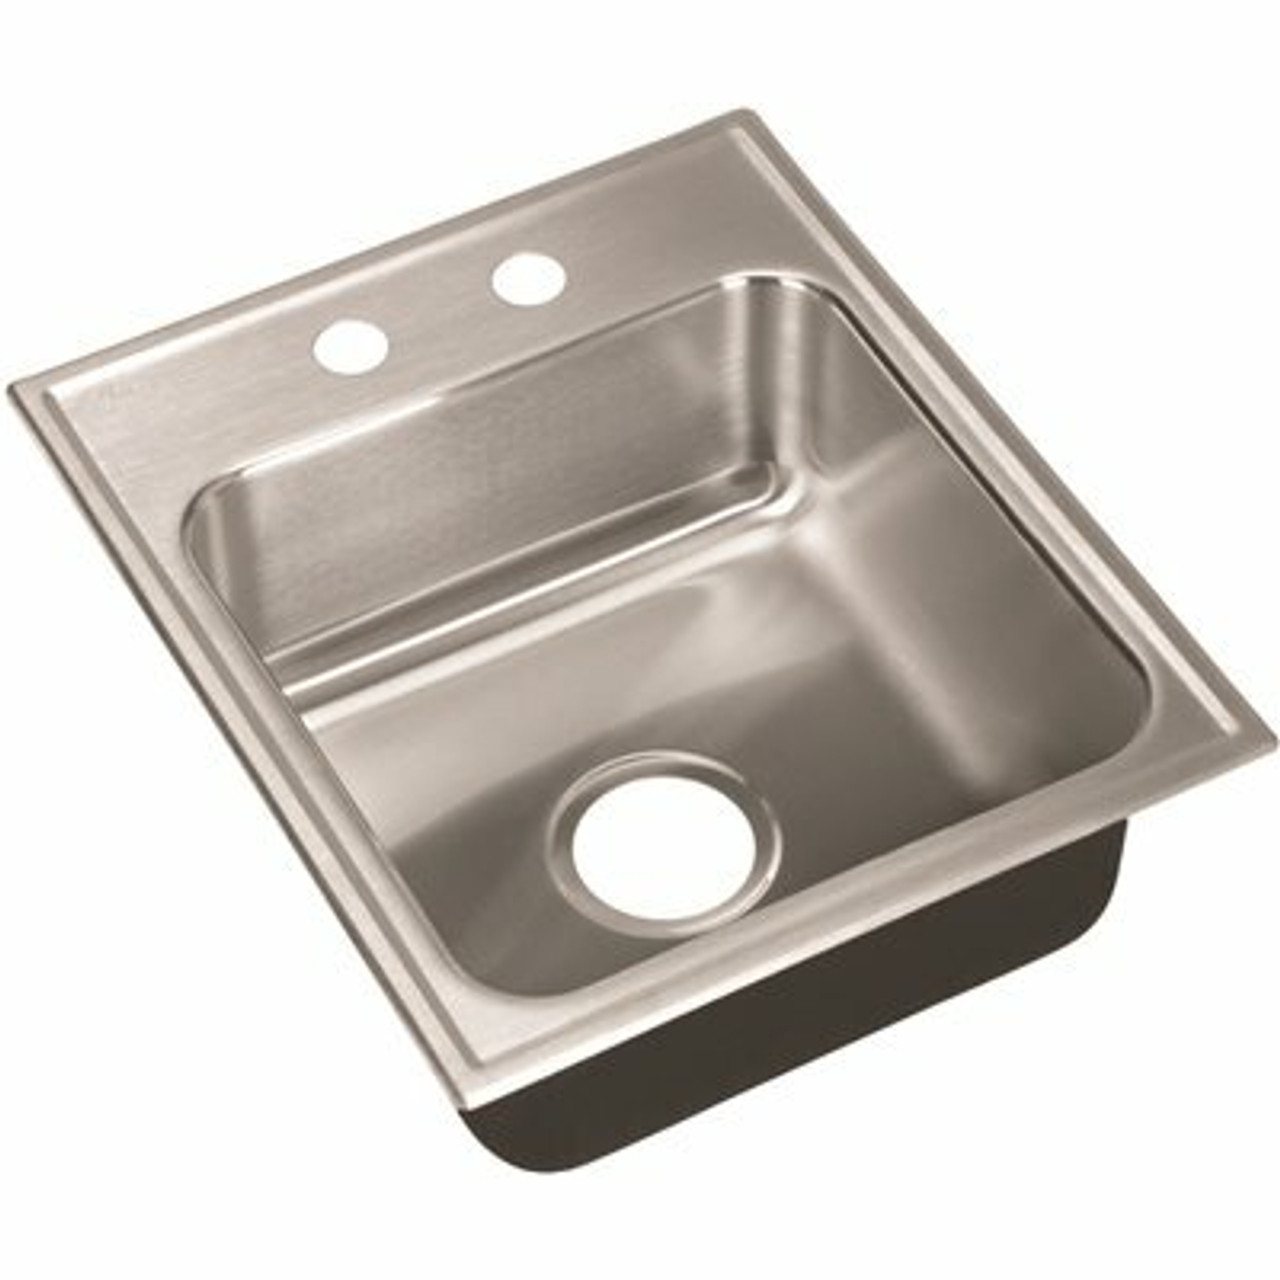 Just Manufacturing 18-Gauge Stainless Steel 18 In. O.D. X 15 In. 2-Hole Single Bowl Drop-In Kitchen Sink With Faucet Ledge